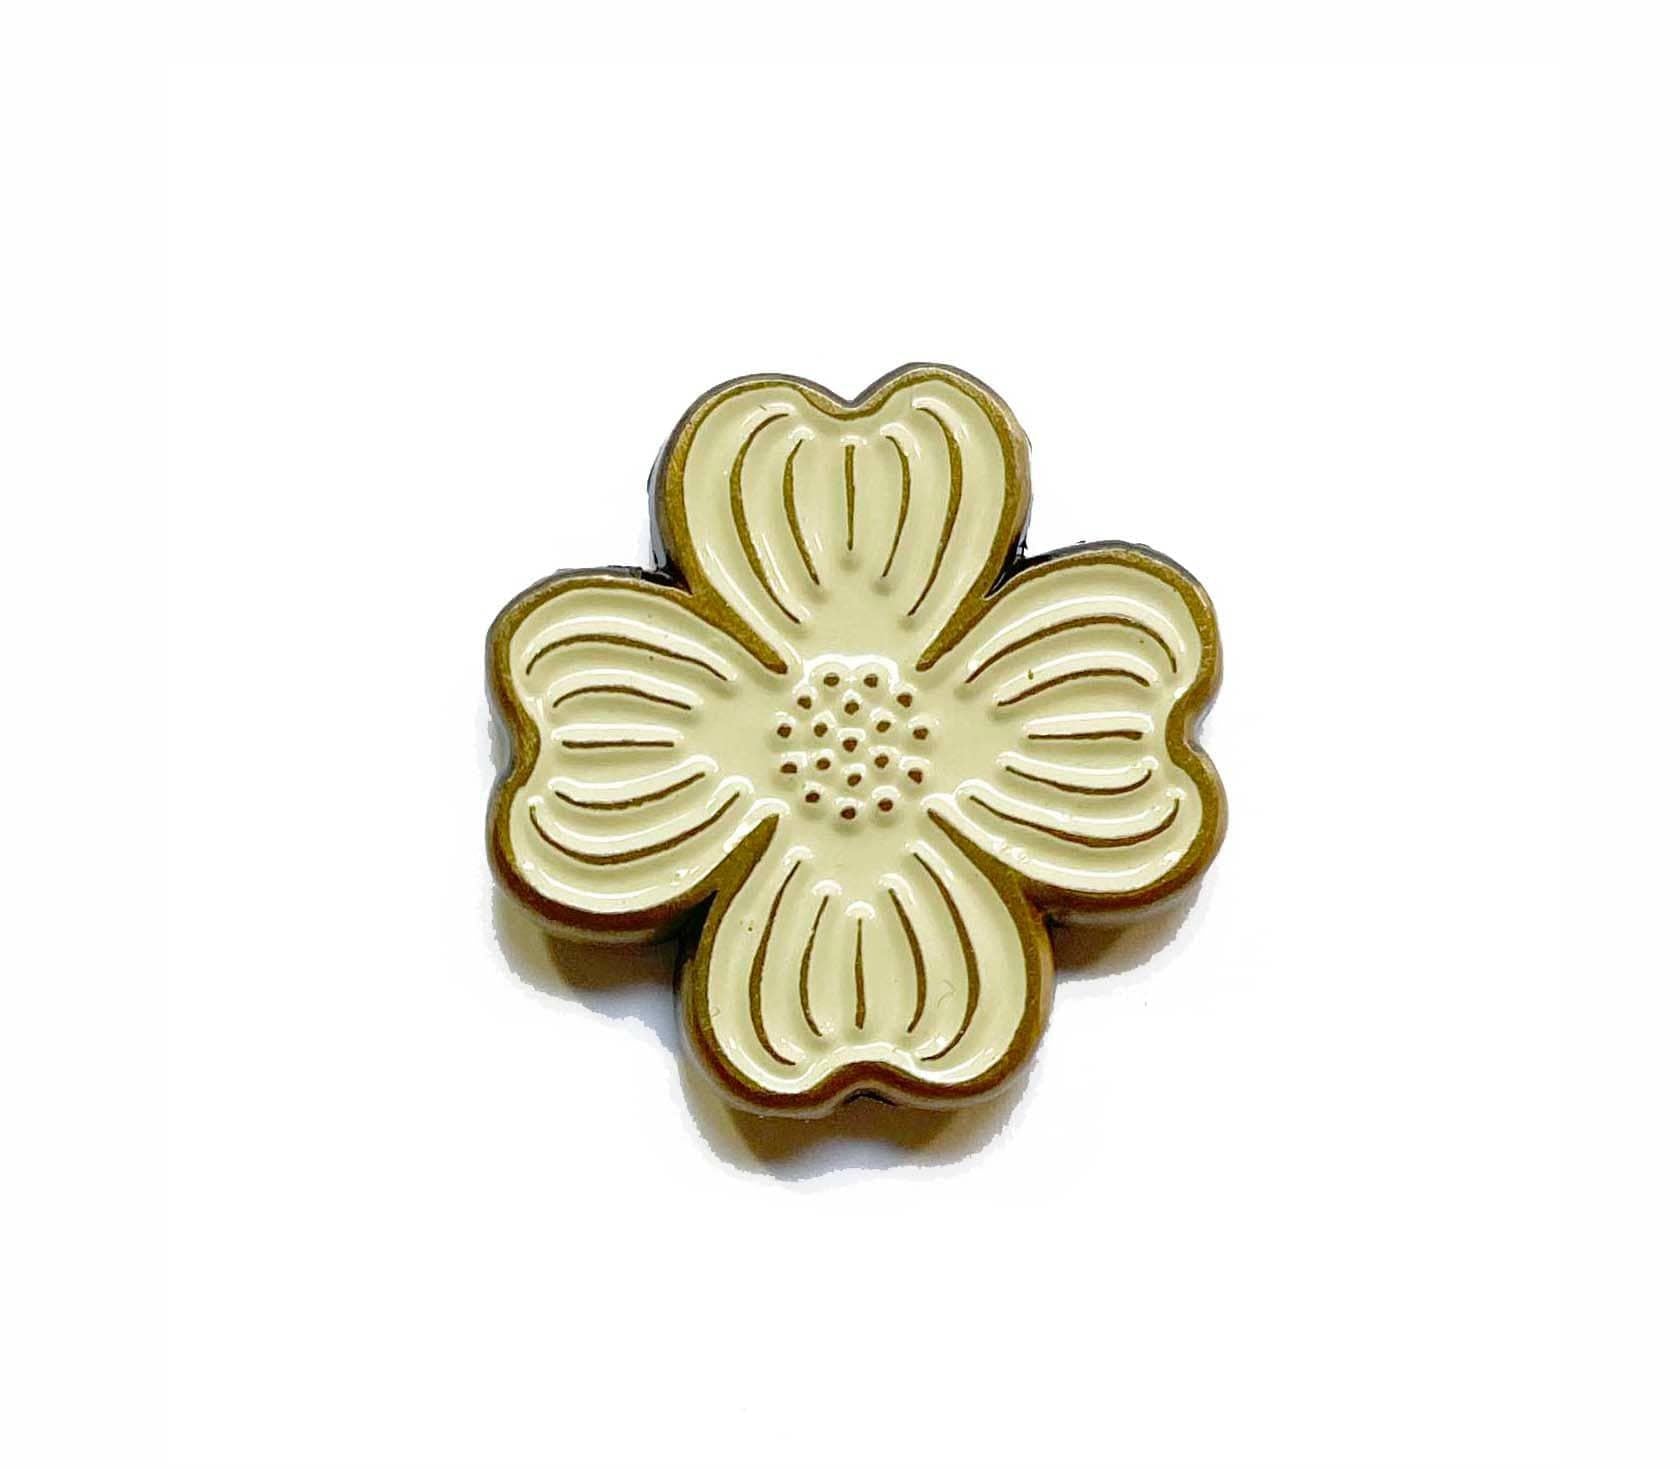 The Dogwood Enamel Pin by The Wild Wander.